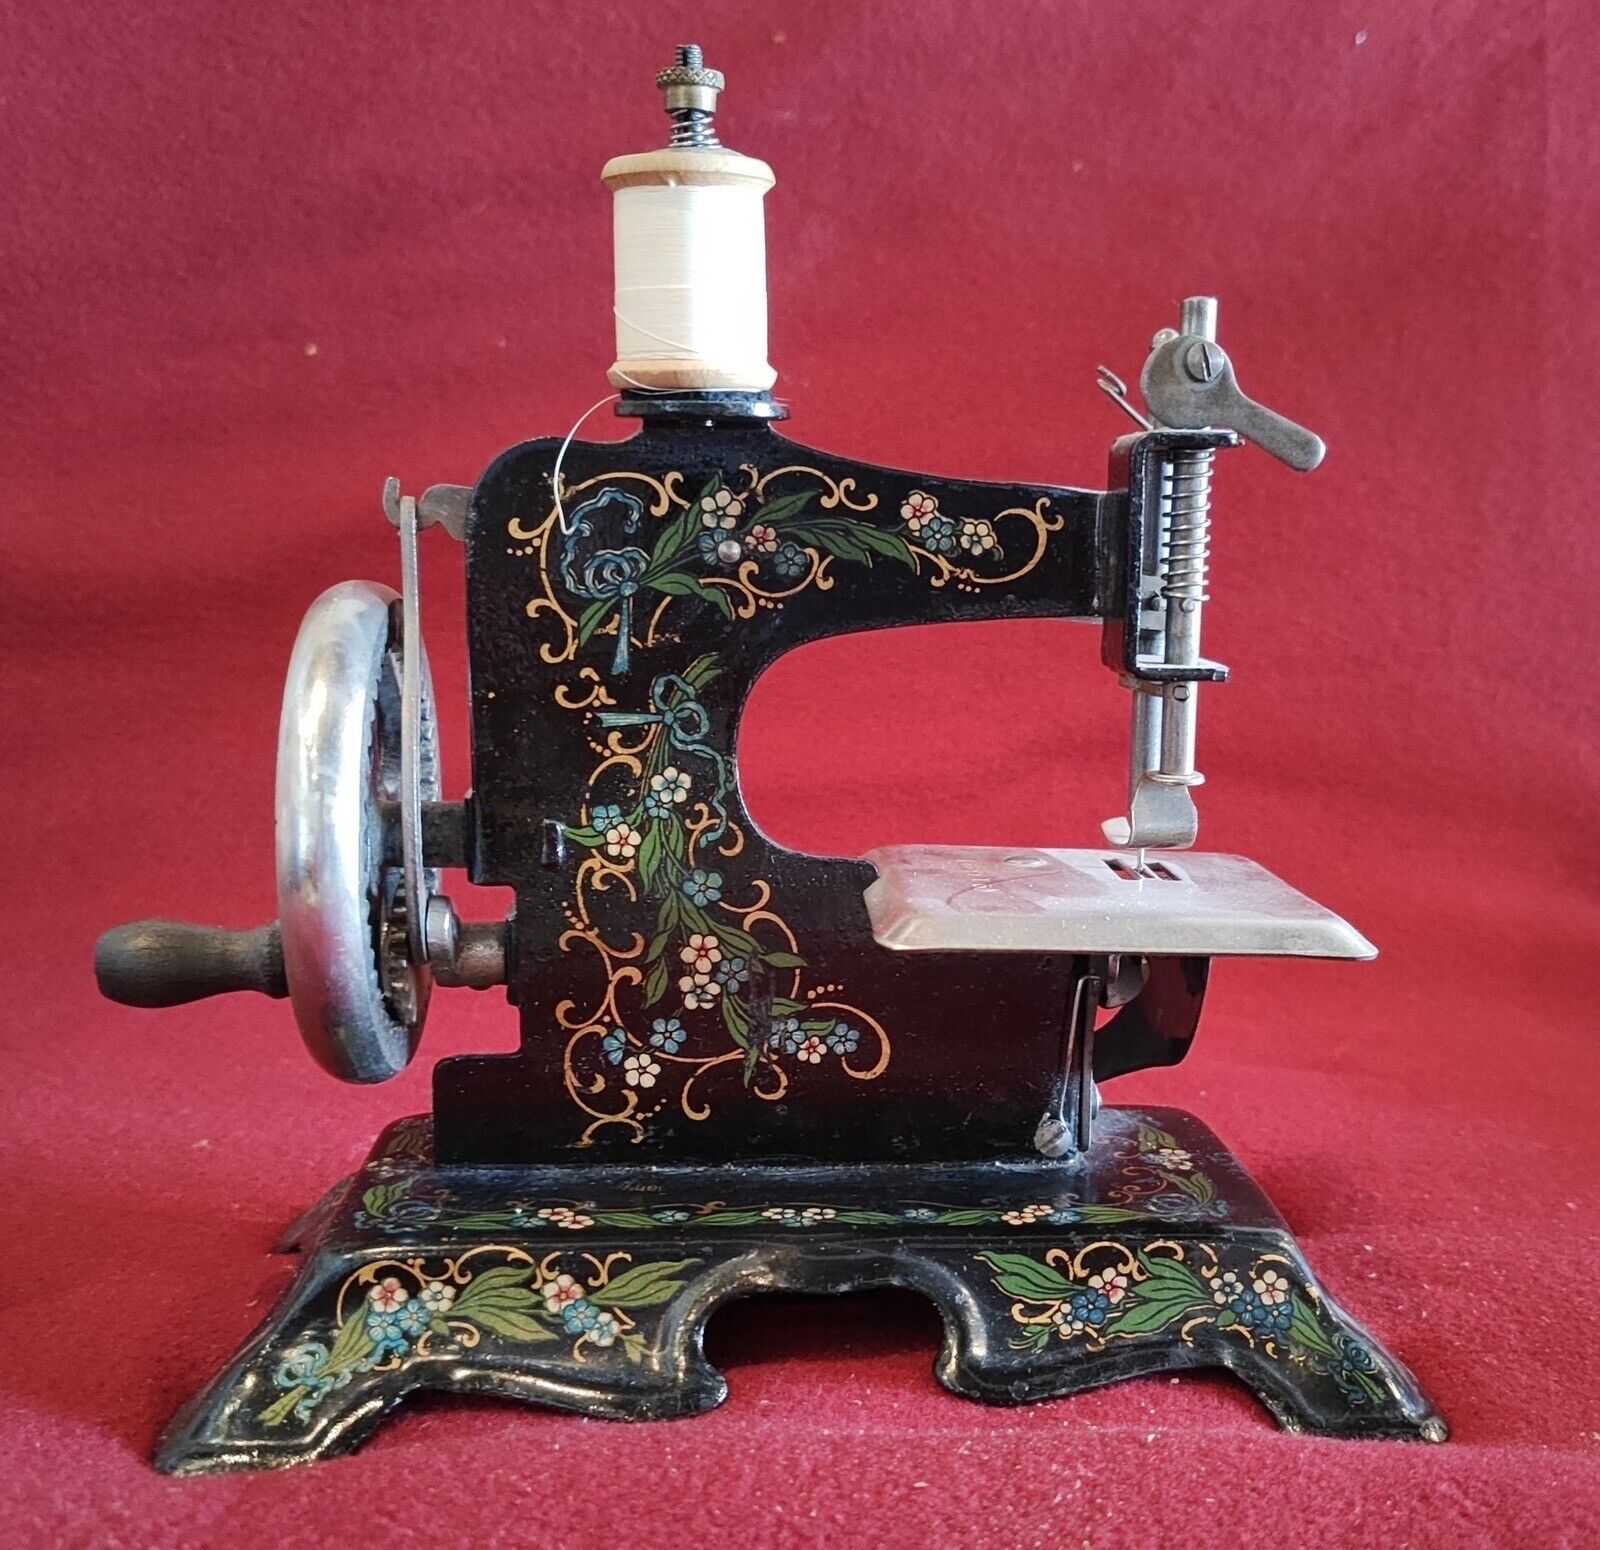 Nice old toy sewing machine from Germany. Original paint Müller??